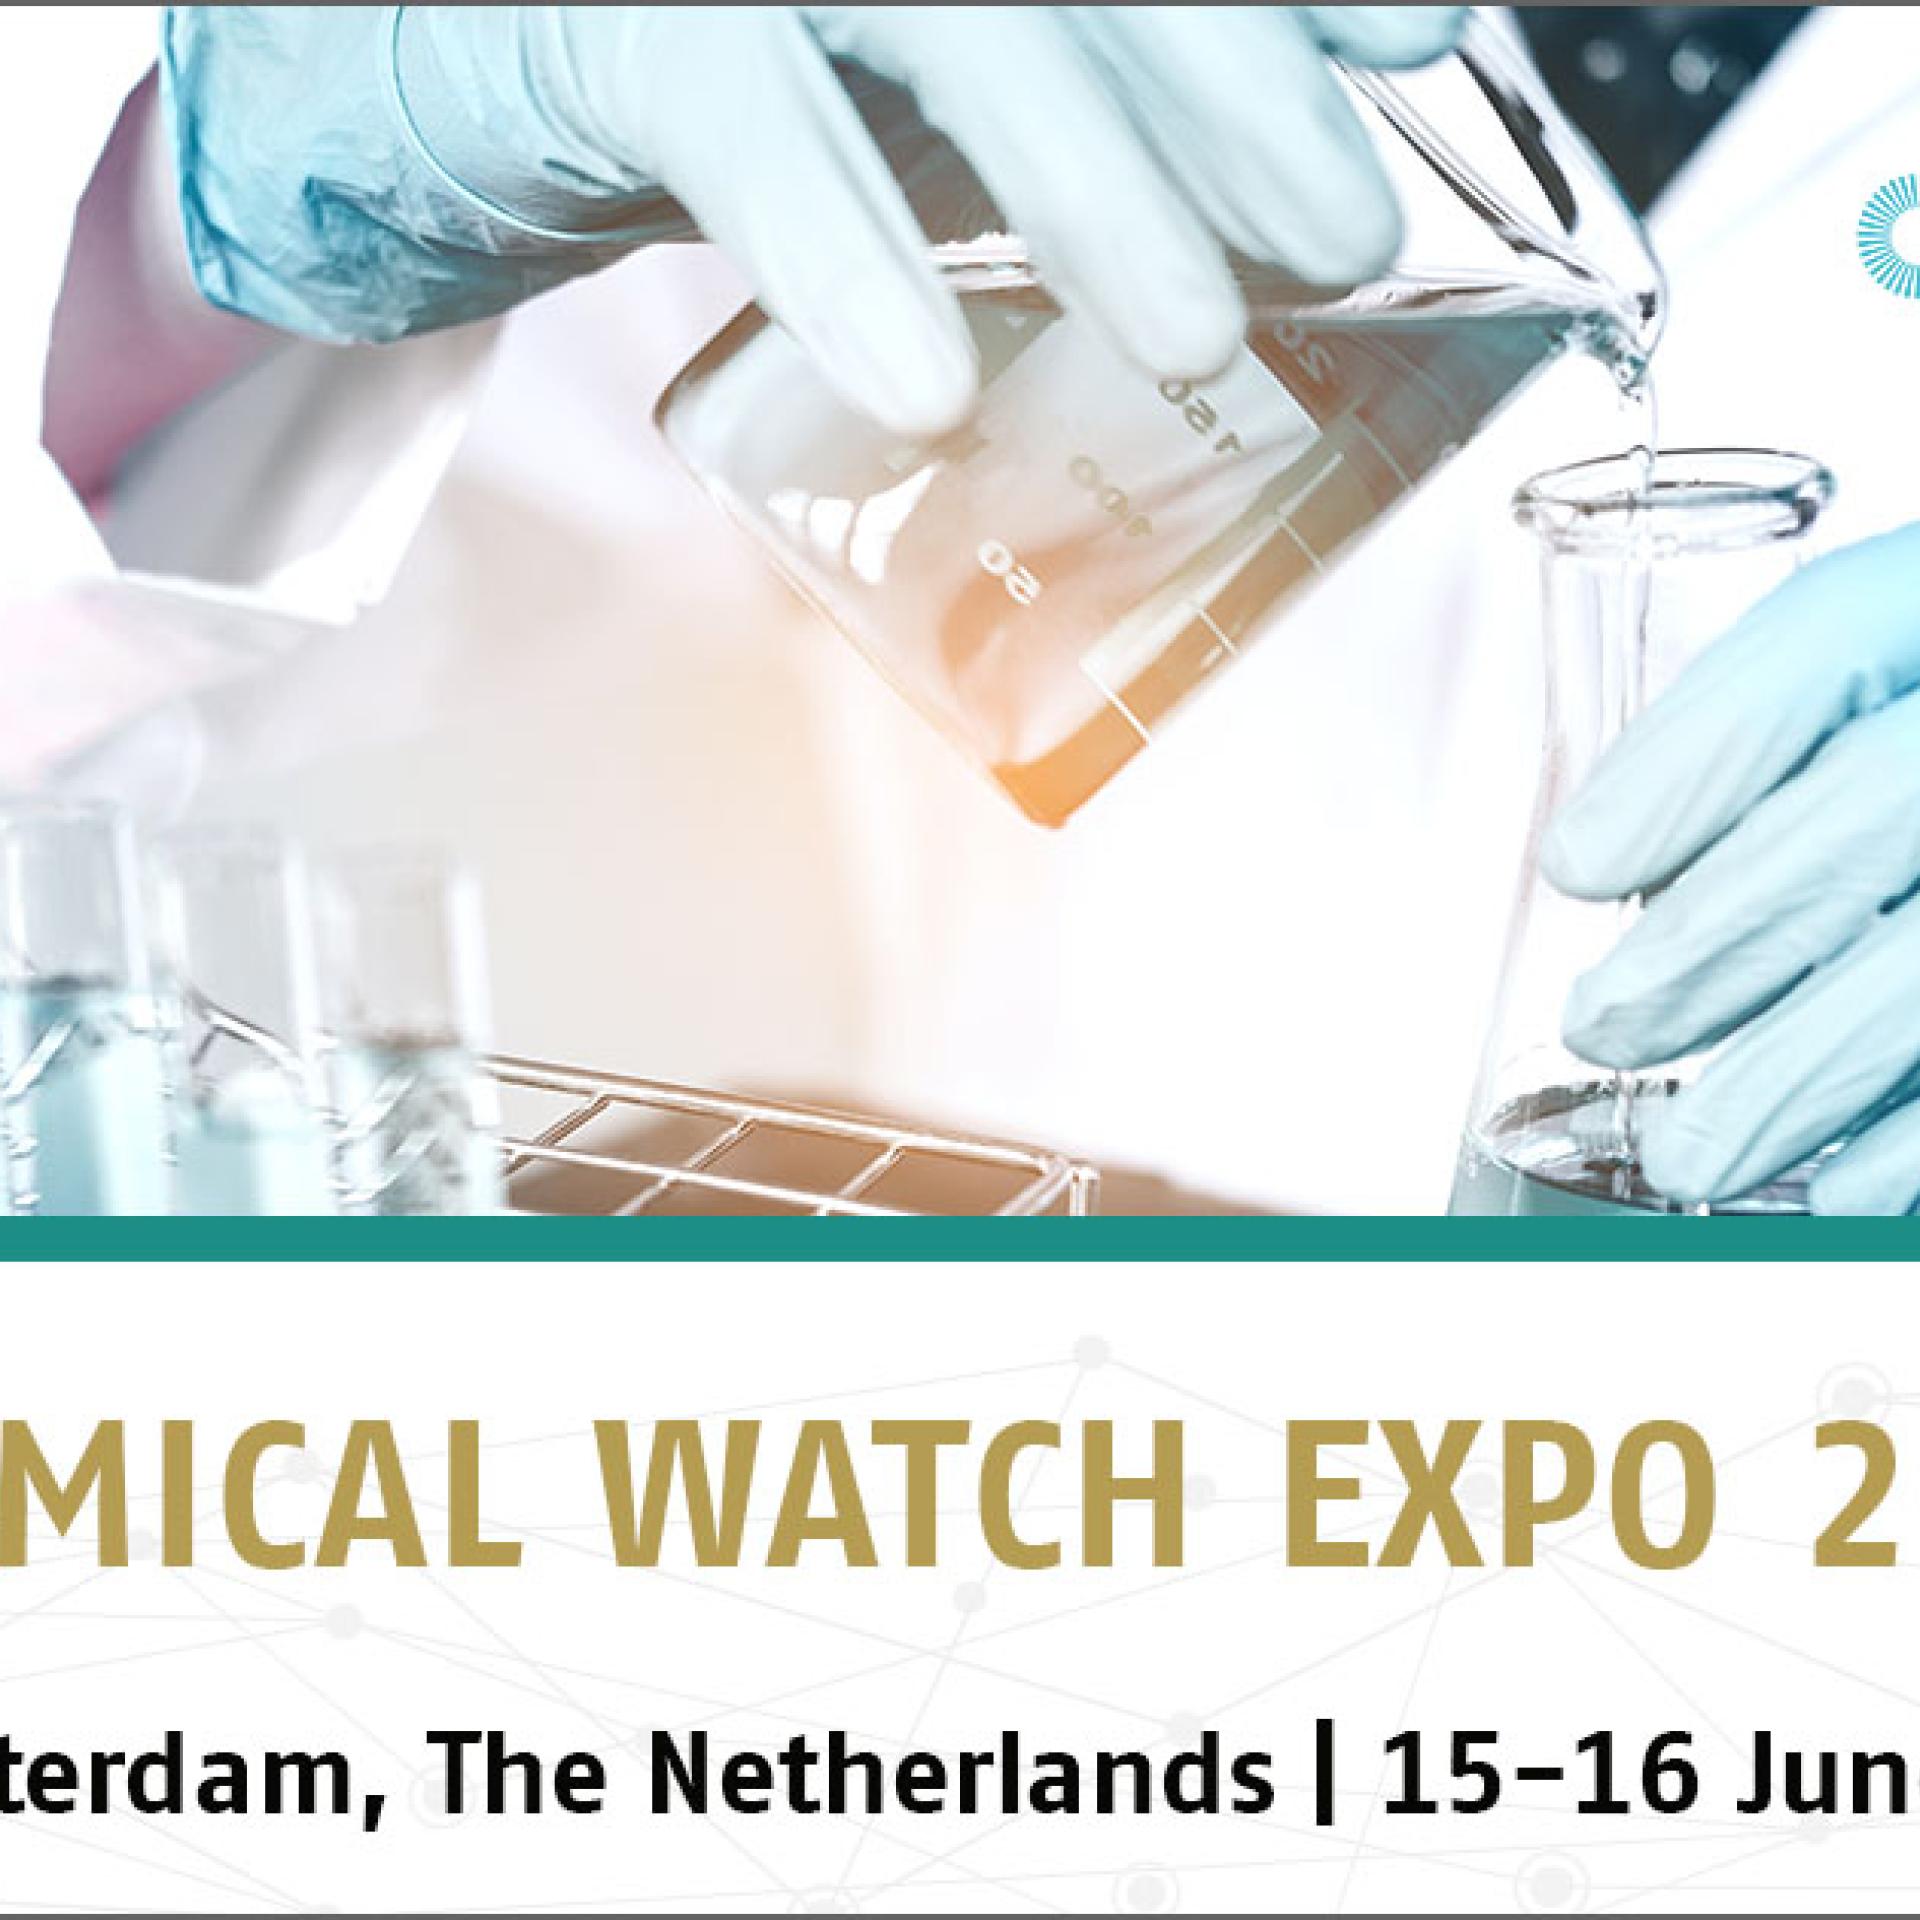 Chemical Watch Expo 2020 | knoell